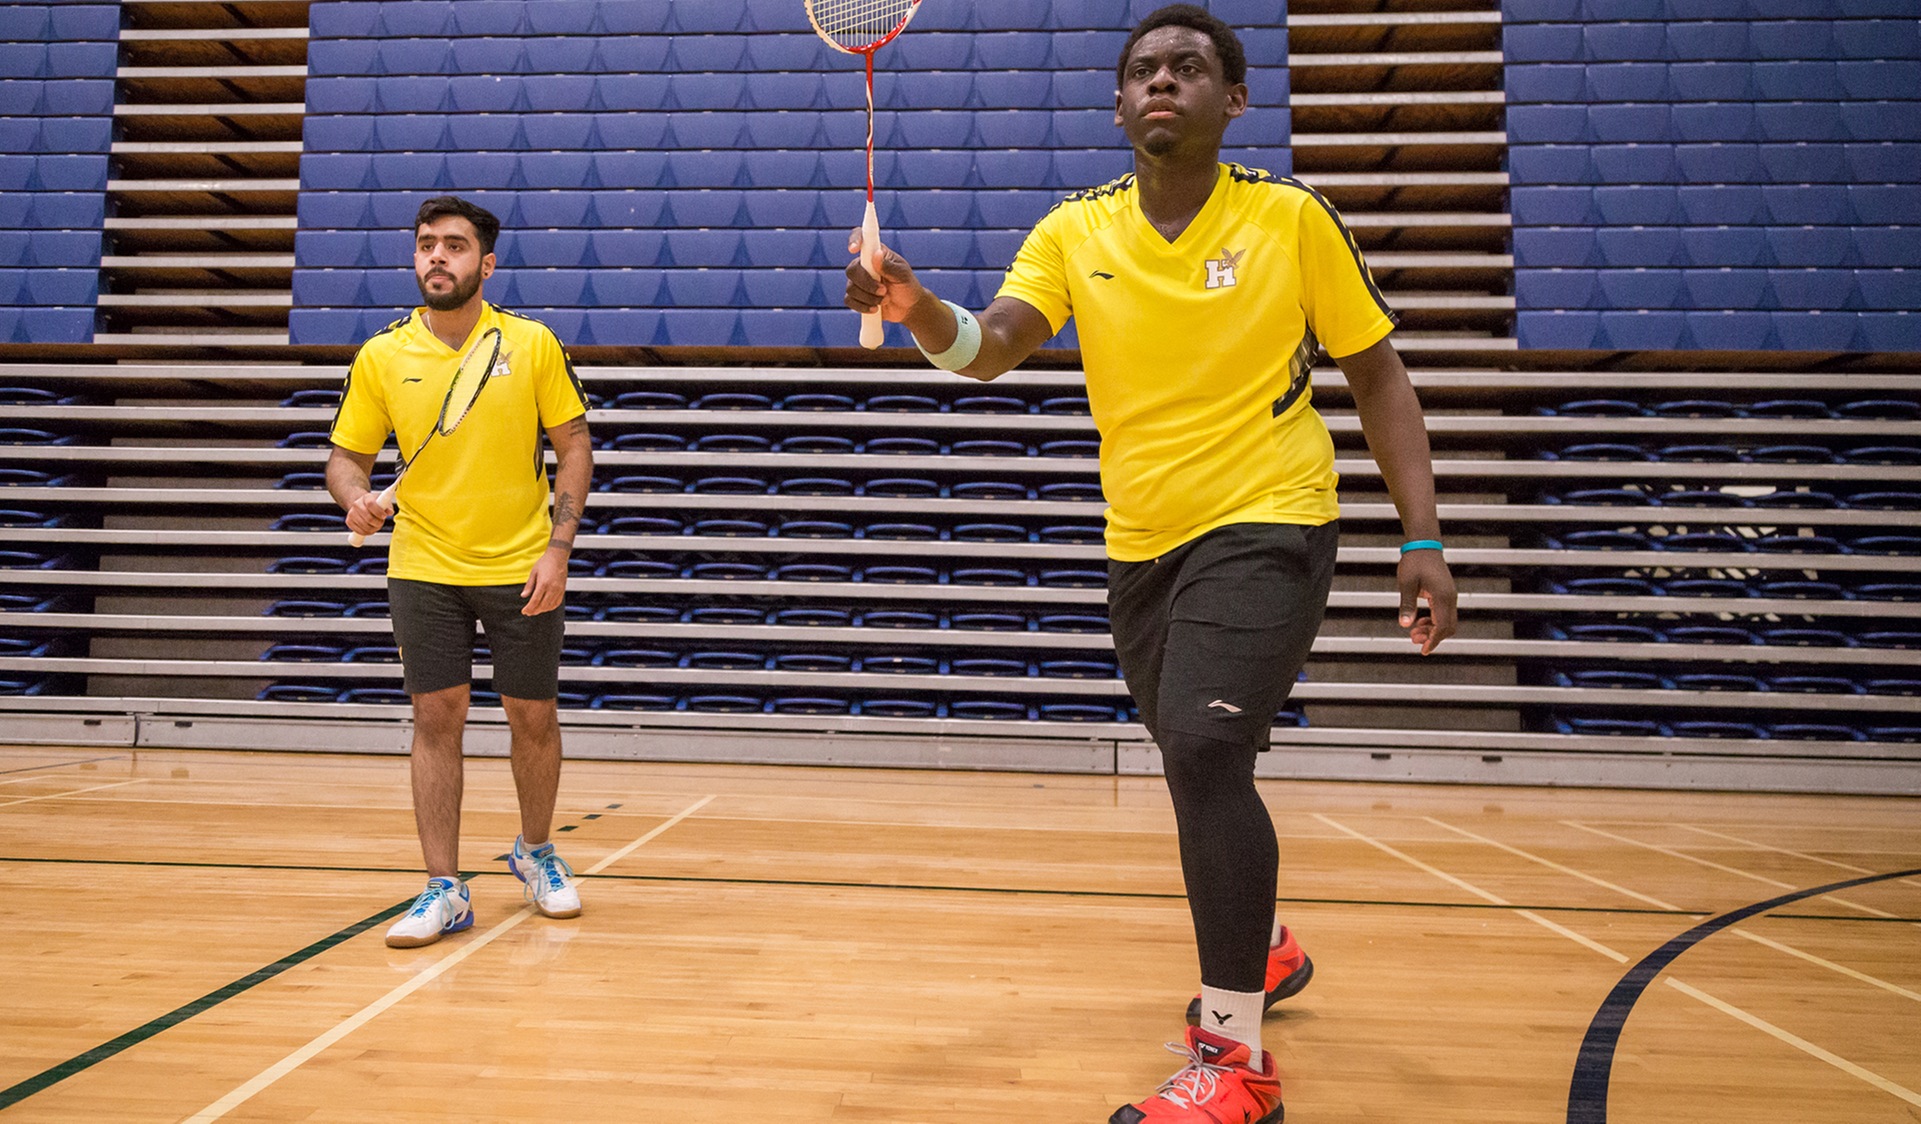 BADMINTON TEAMS PUT THEMSELVES IN POSITION TO ADVANCE TO MEDAL GAMES ON SATURDAY